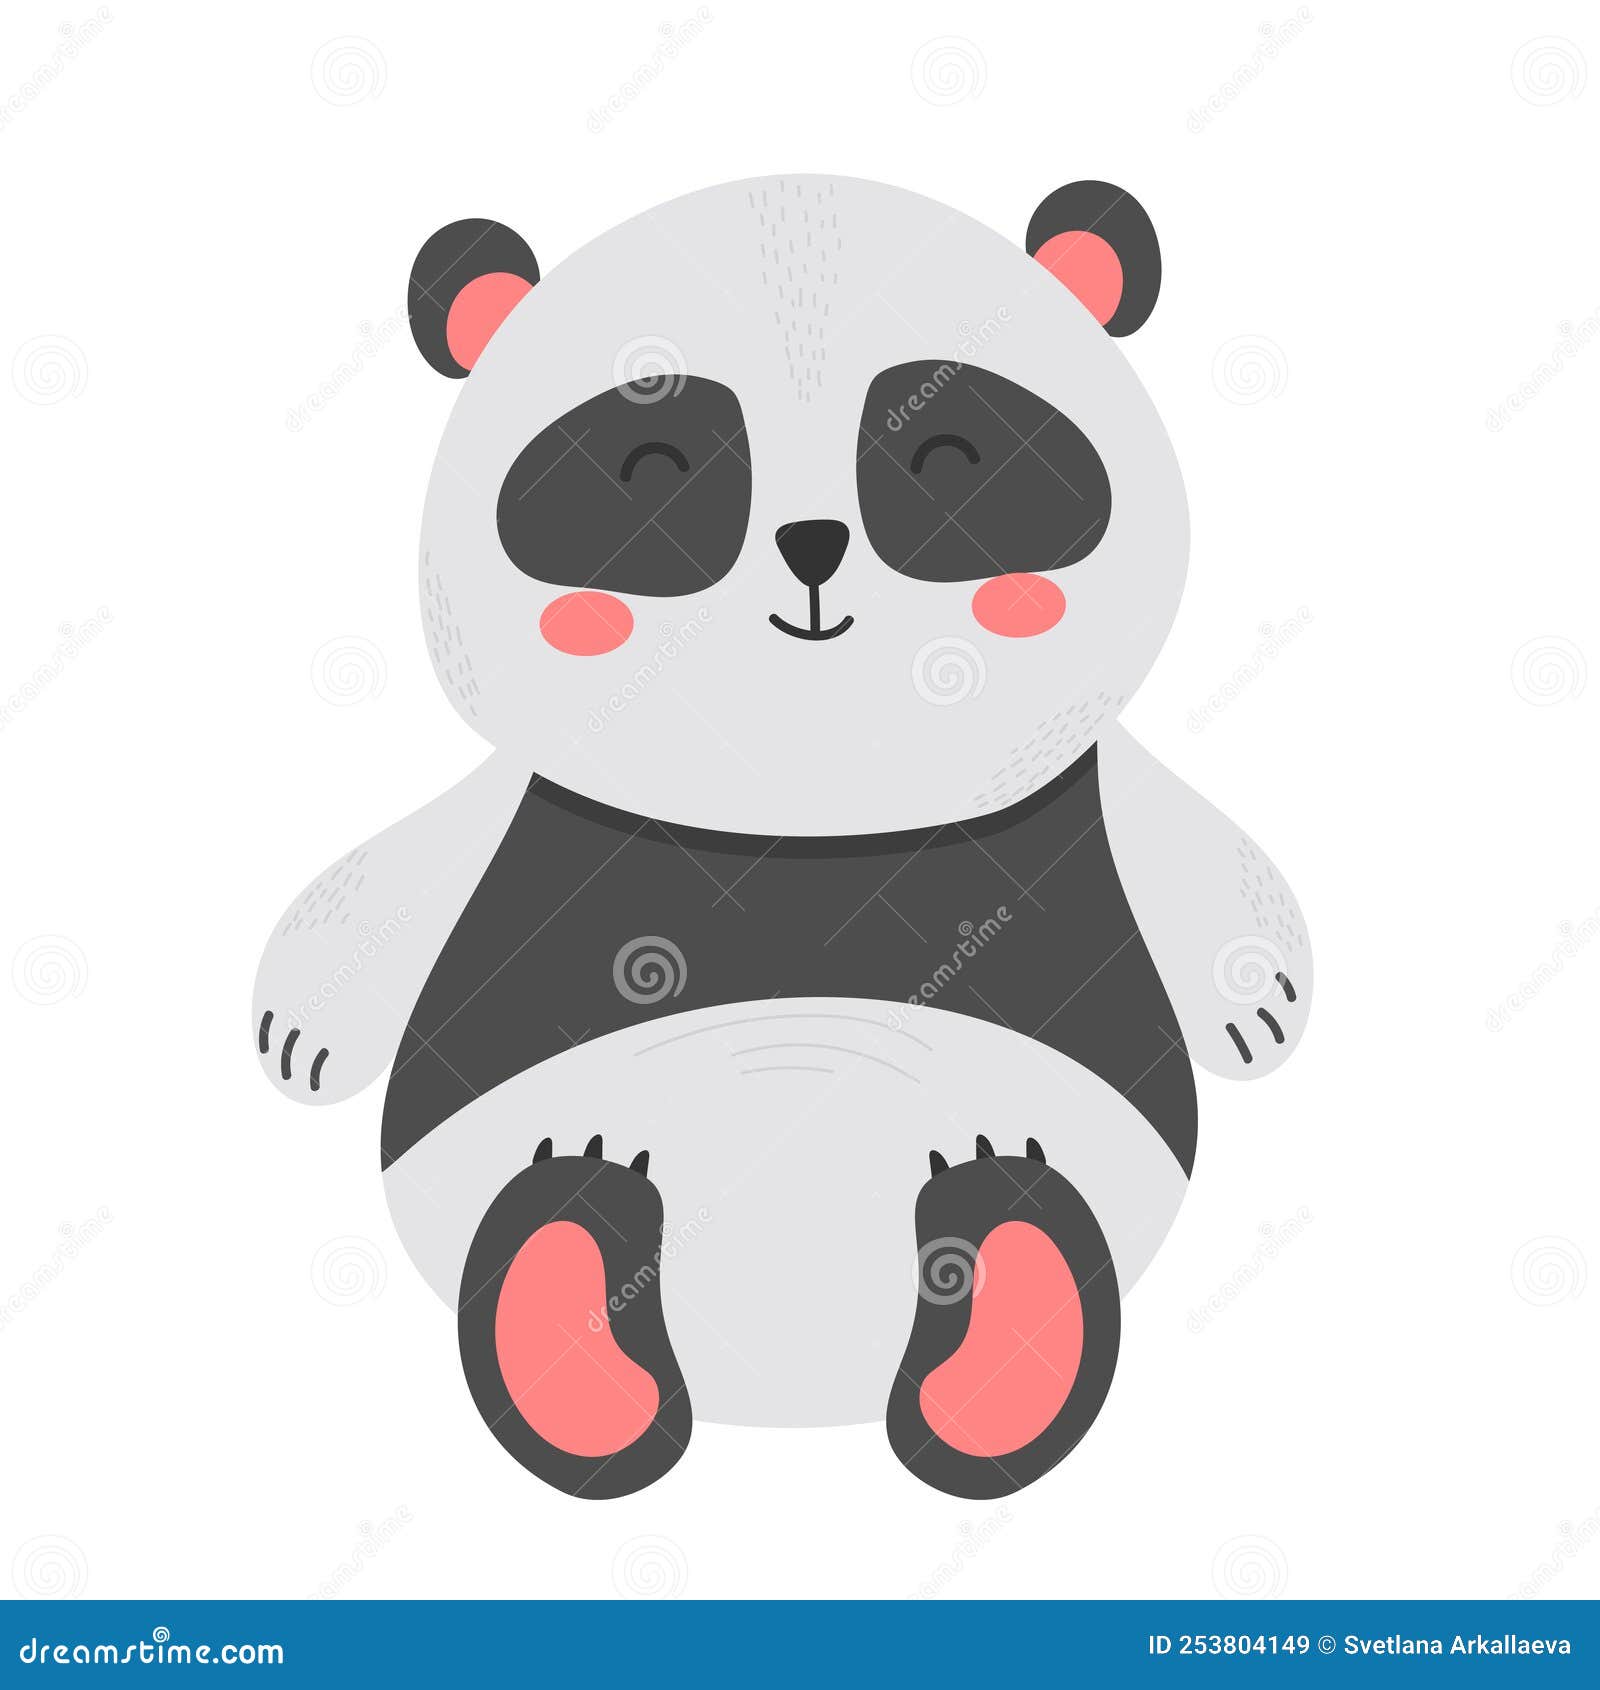 This Is Sketch Of Panda Done By Me Its Takes In - GranNino